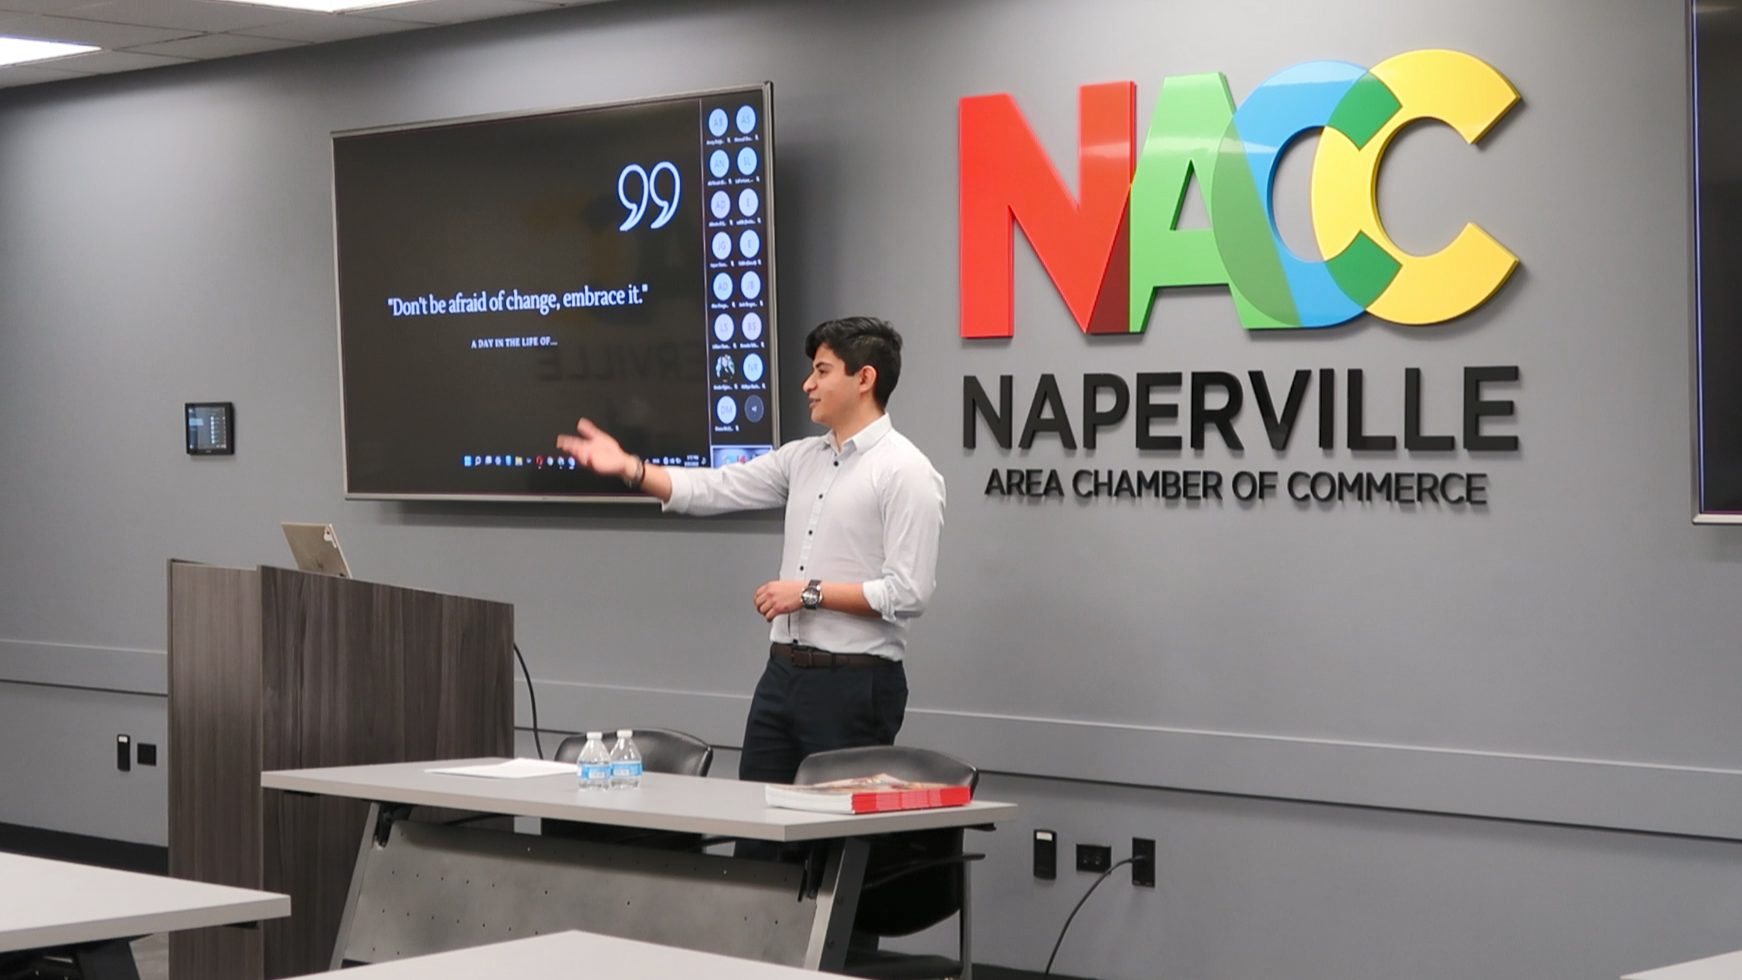 Naperville Area Chamber of Commerce / A day in the life of...